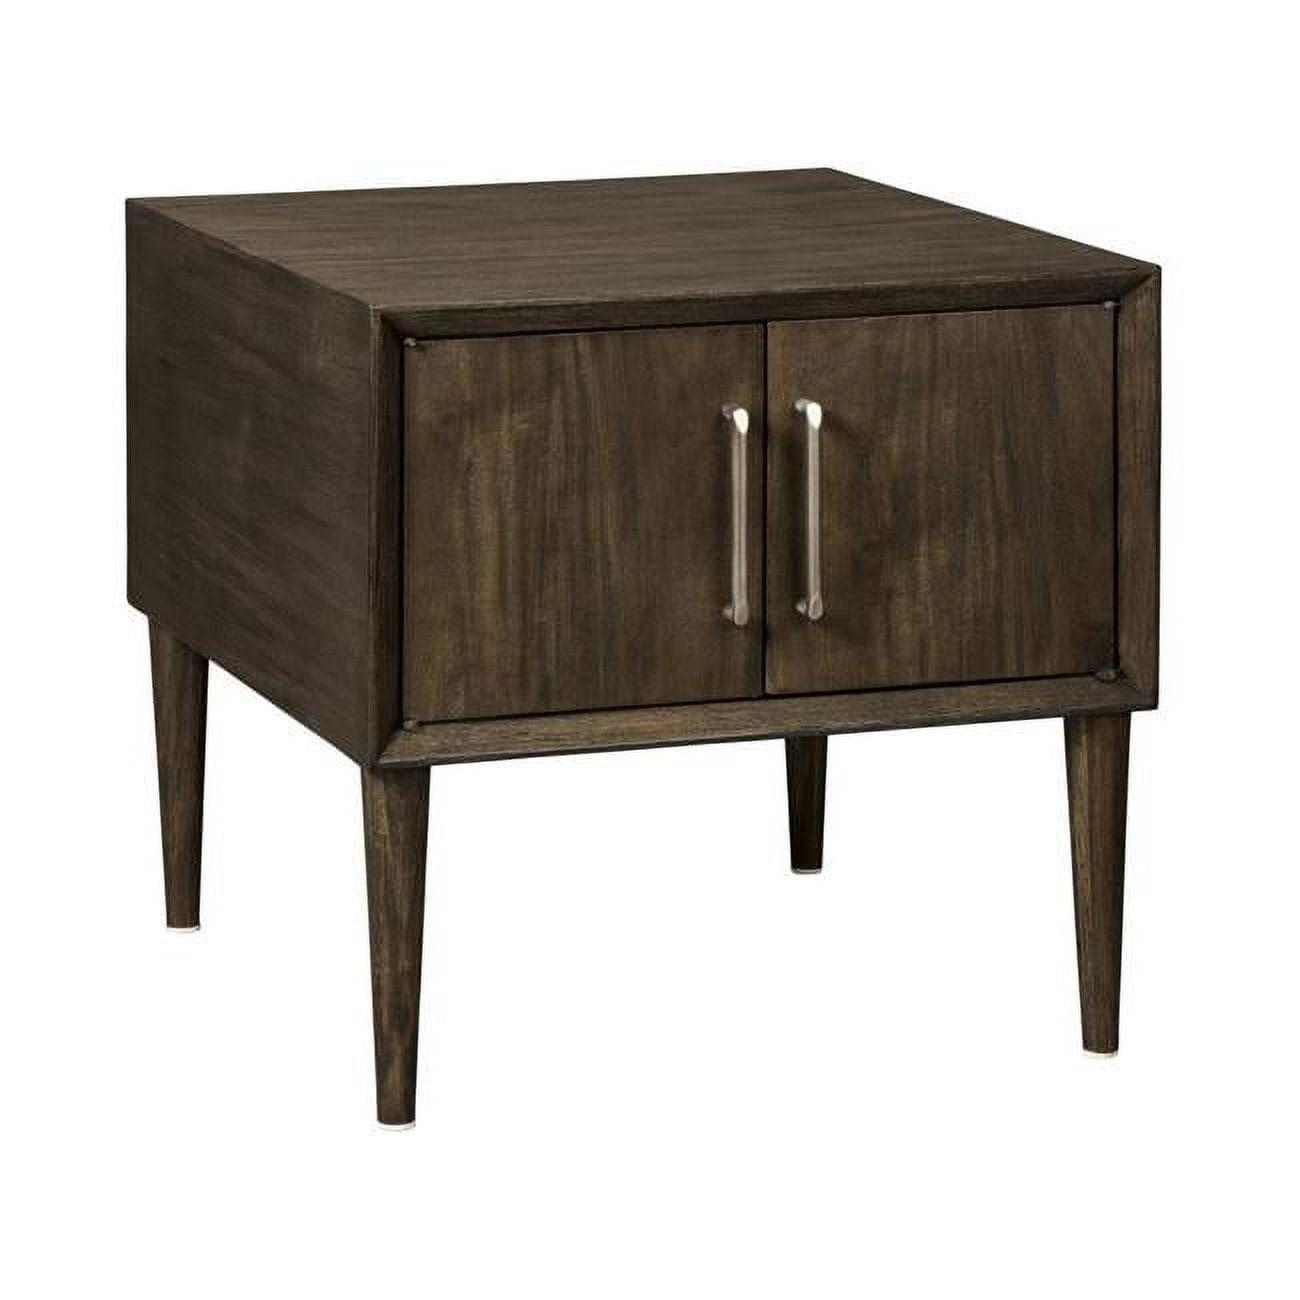 Transitional Square Brown Wood & Metal End Table with Storage